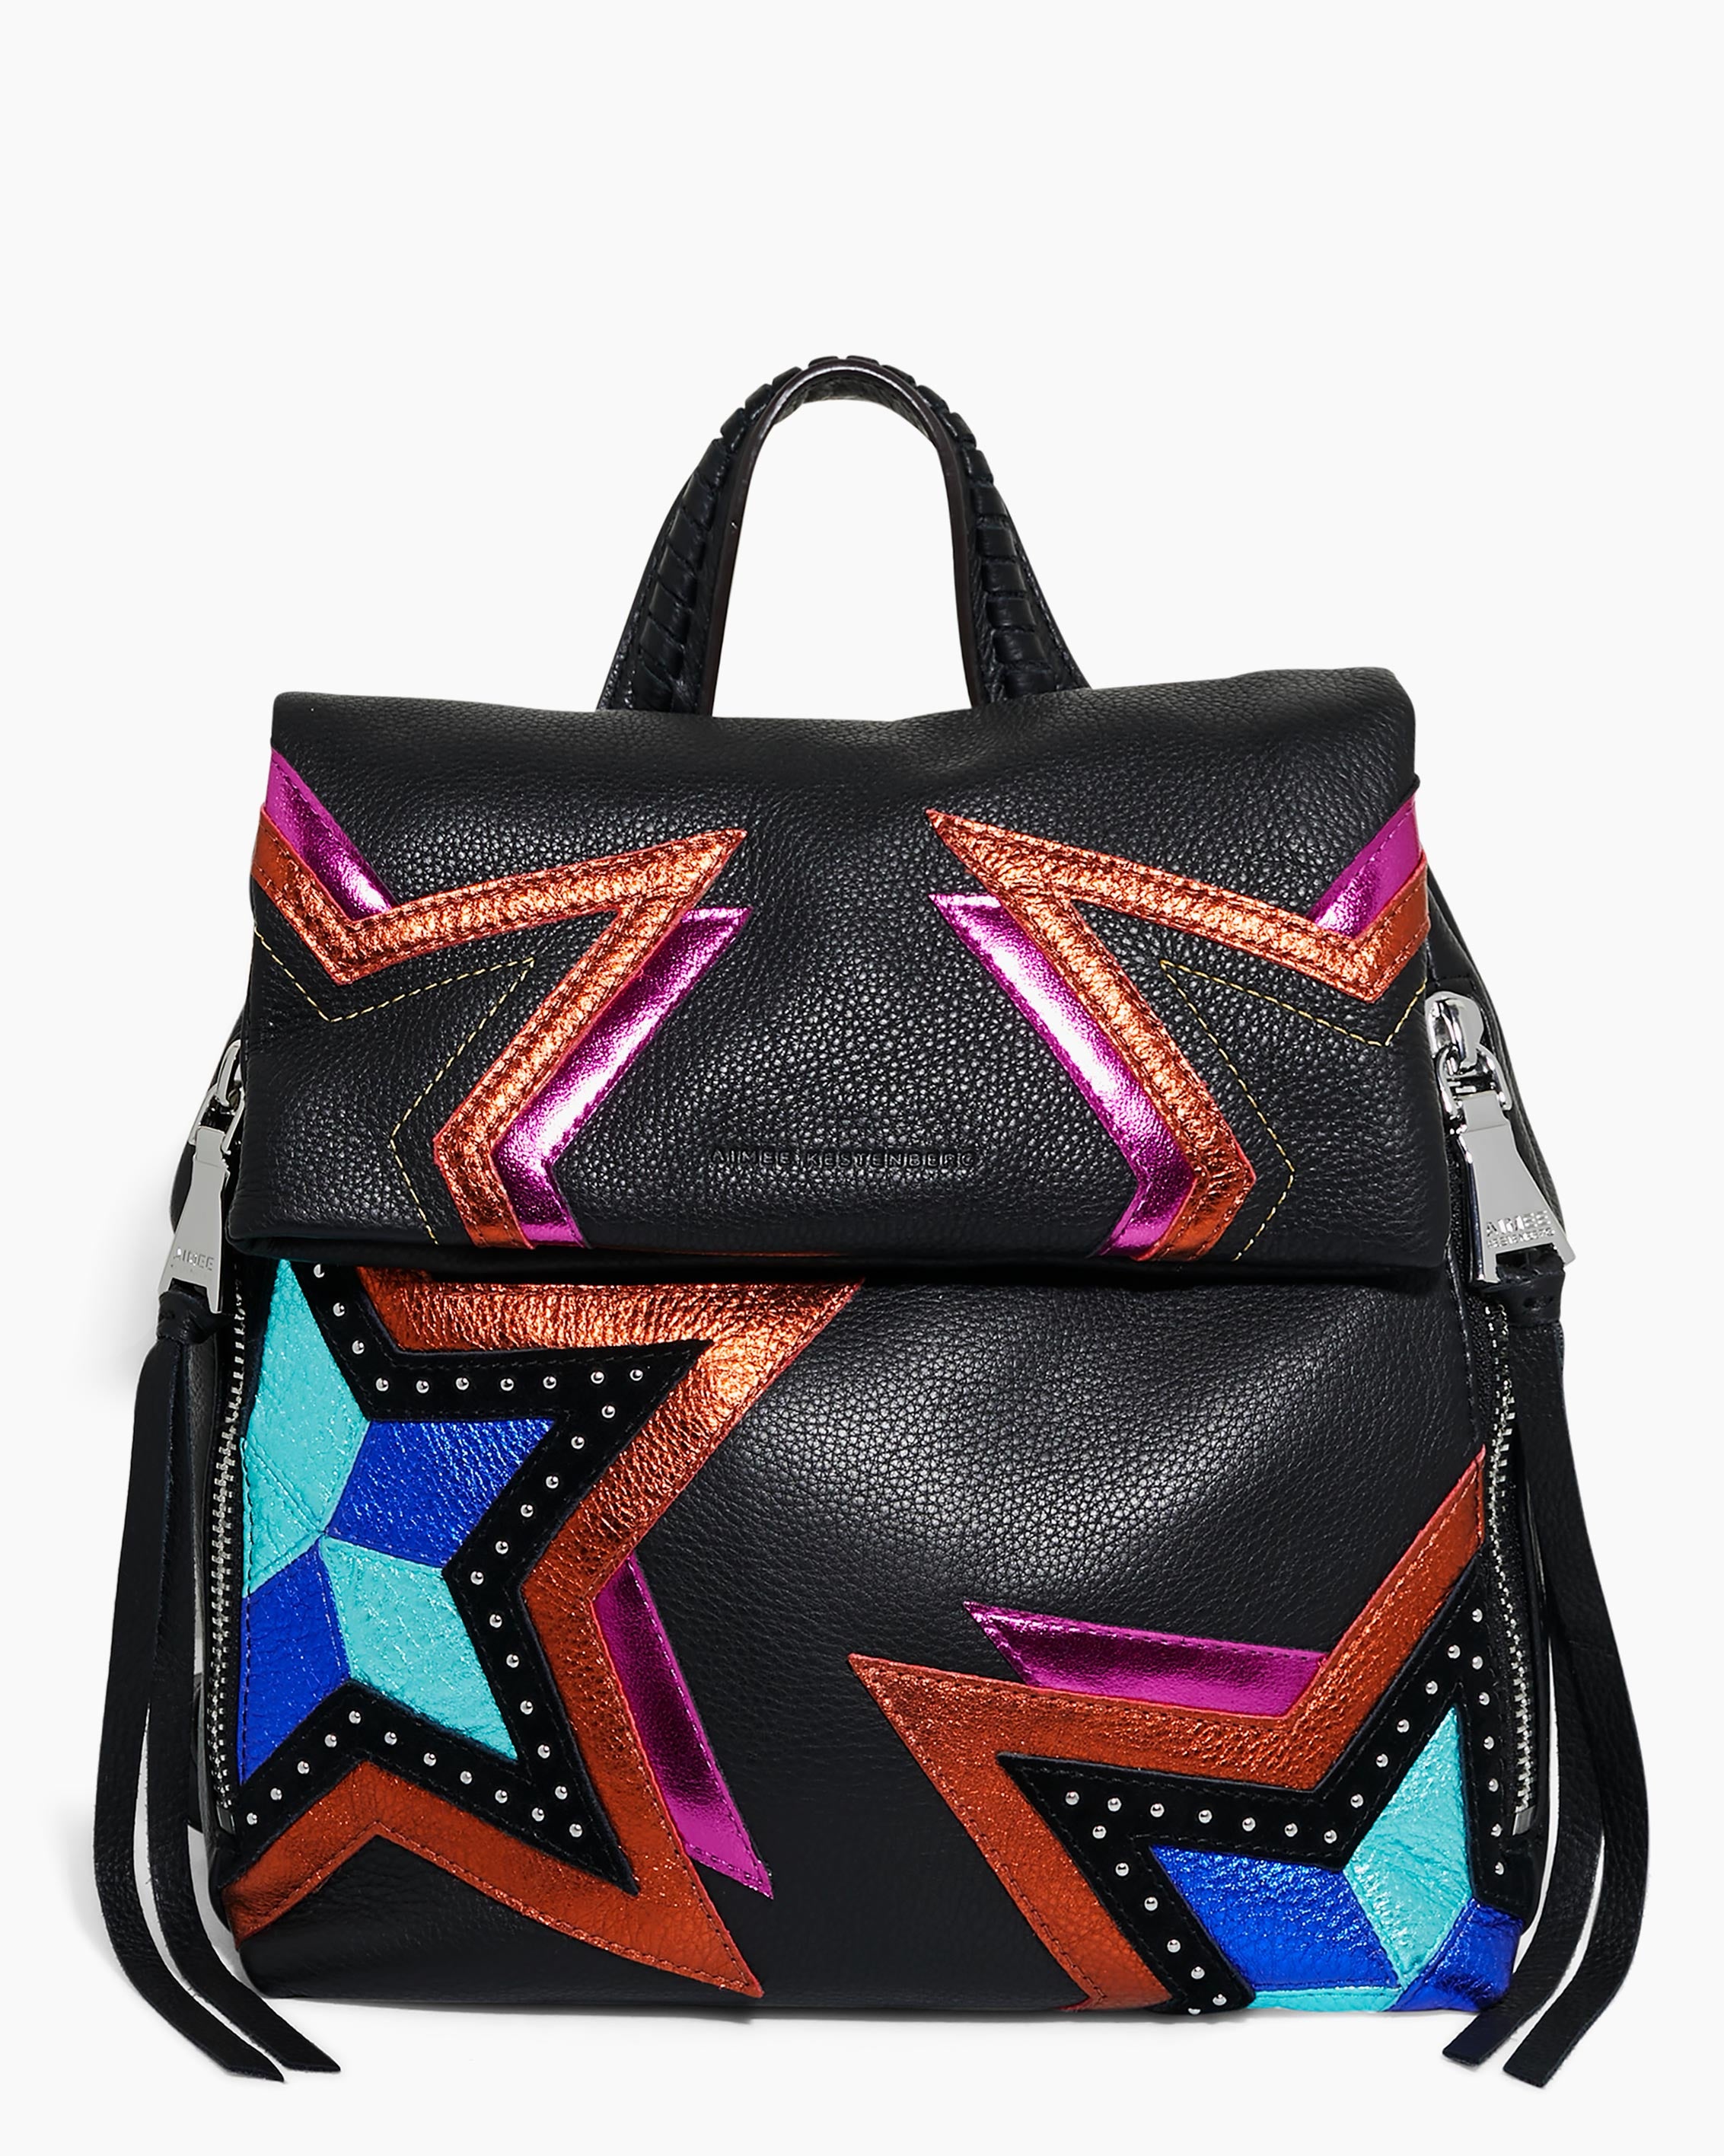 The Backpacks Are Back! Yes Or No To This '90's Trend?